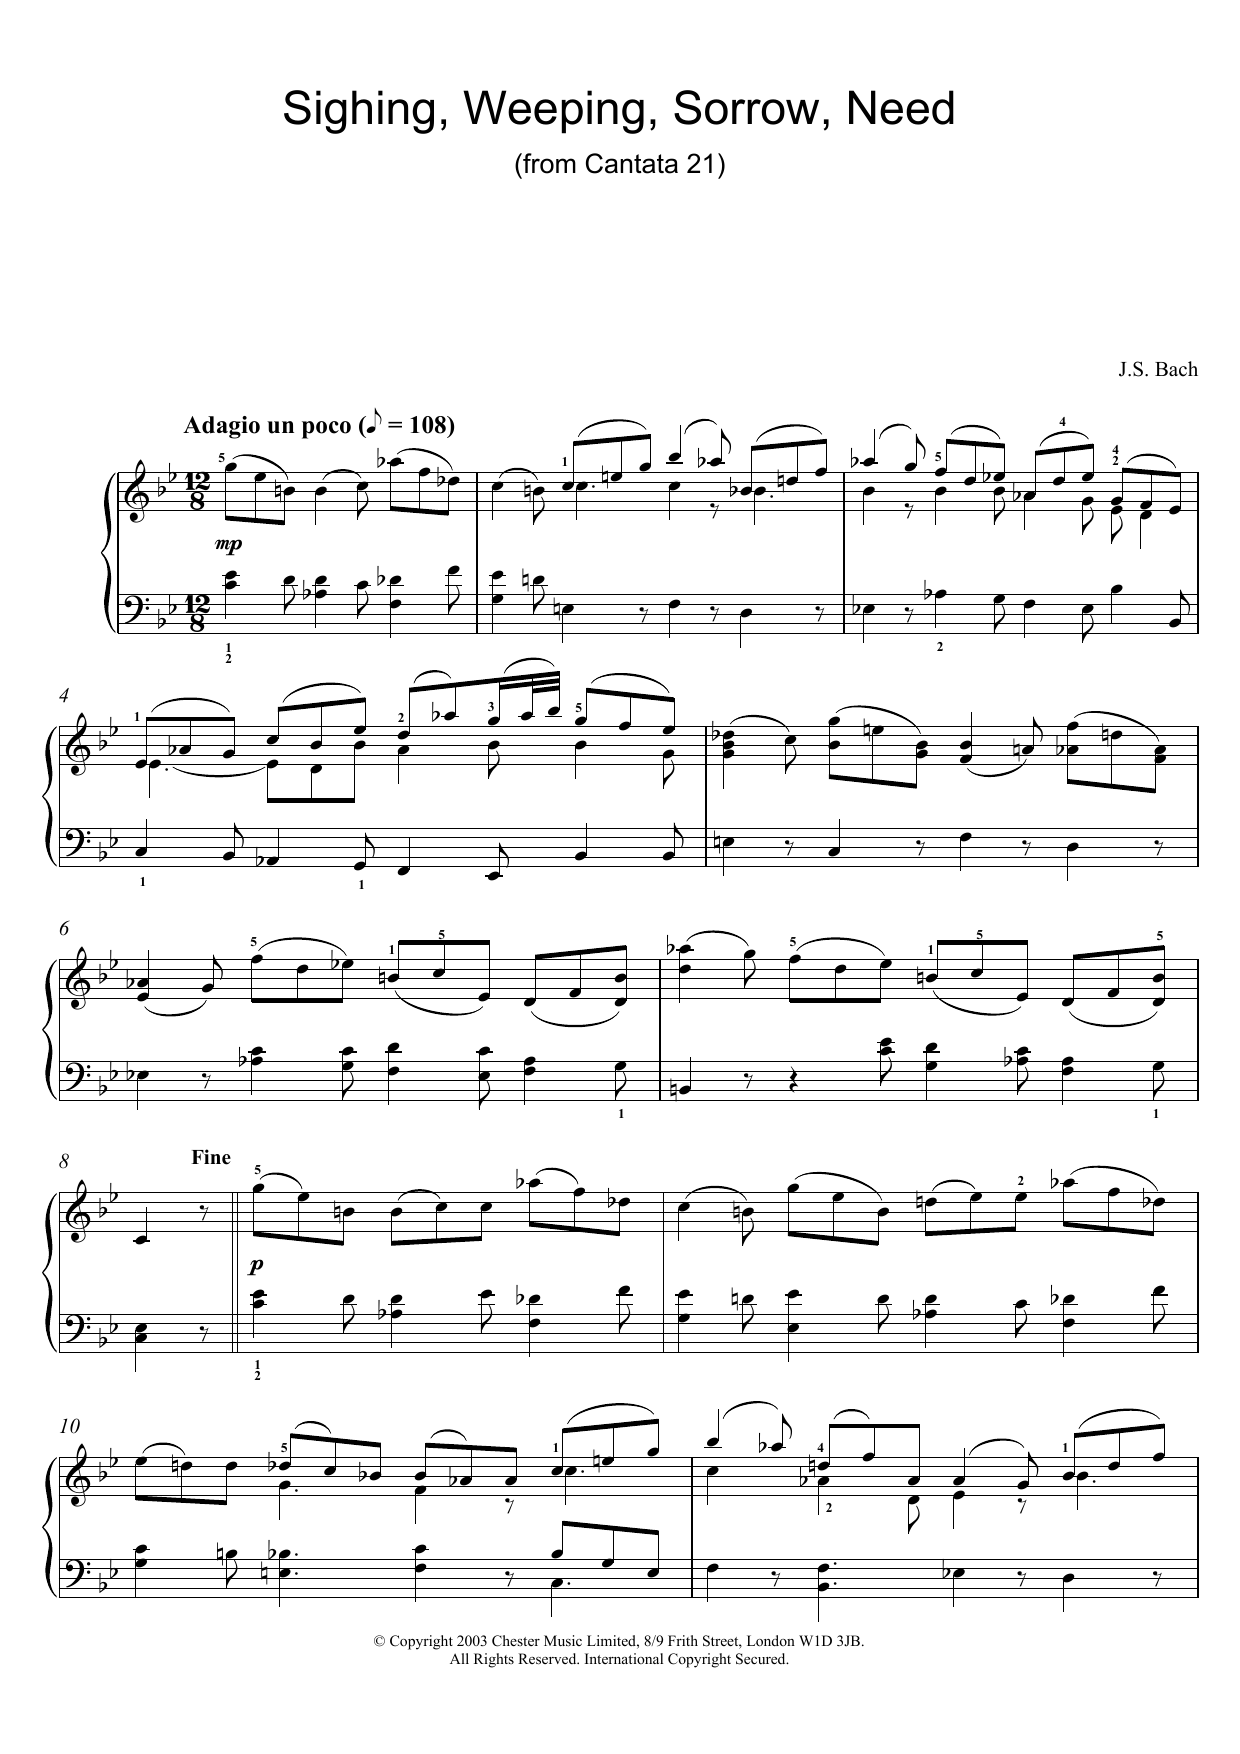 J.S. Bach Sighing, Weeping, Sorrow, Need (from Cantata 21) sheet music preview music notes and score for Piano including 2 page(s)